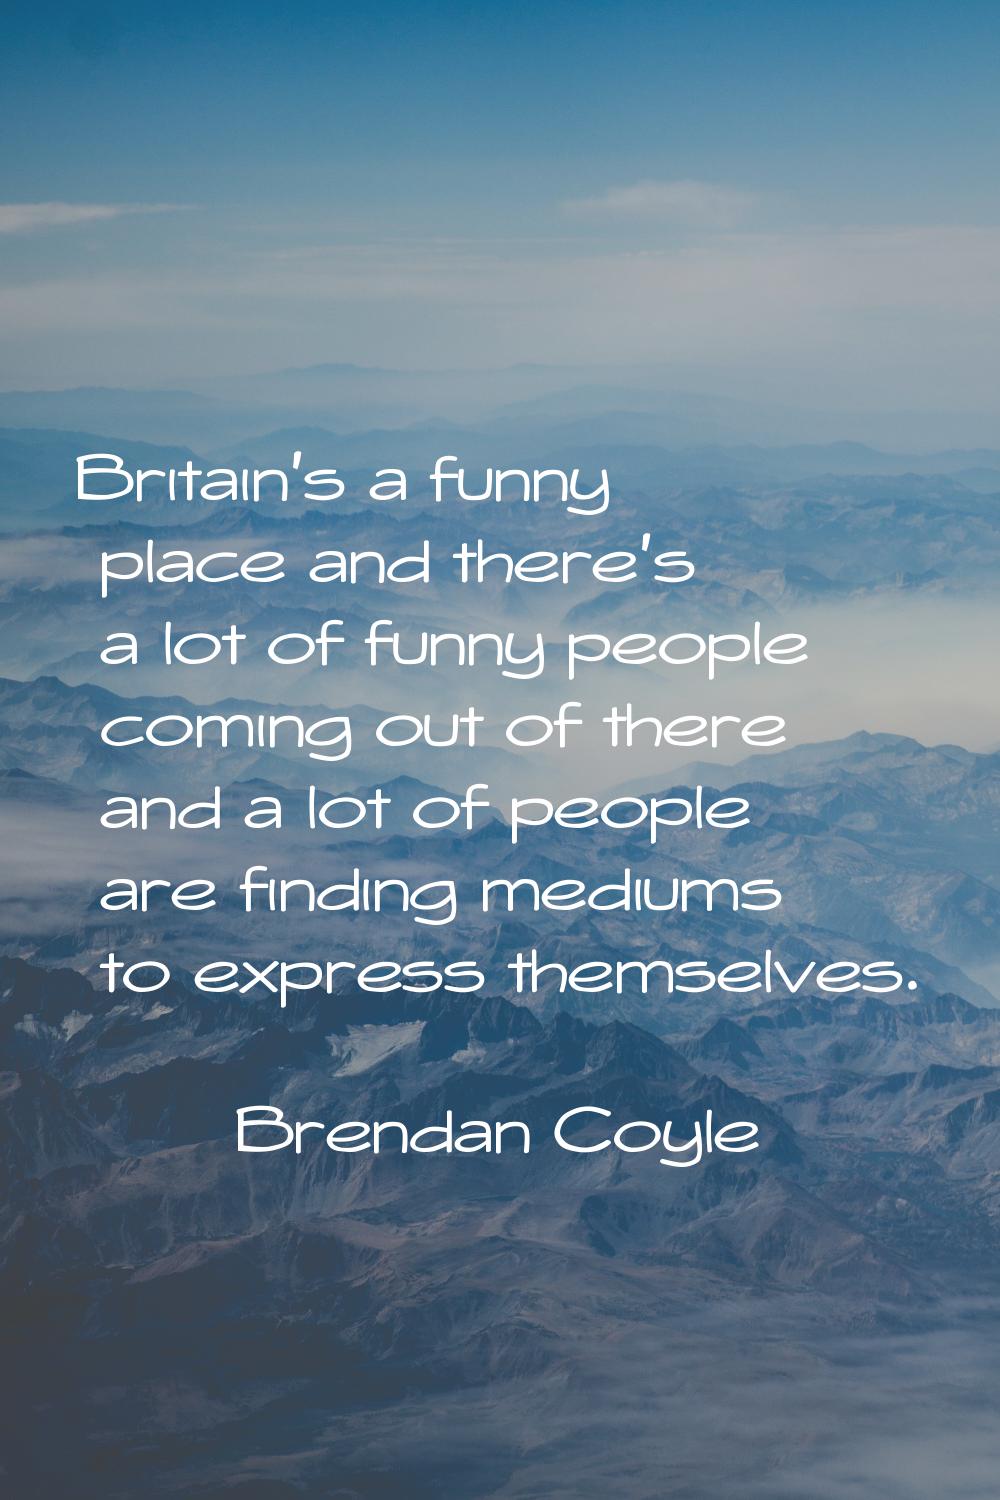 Britain's a funny place and there's a lot of funny people coming out of there and a lot of people a